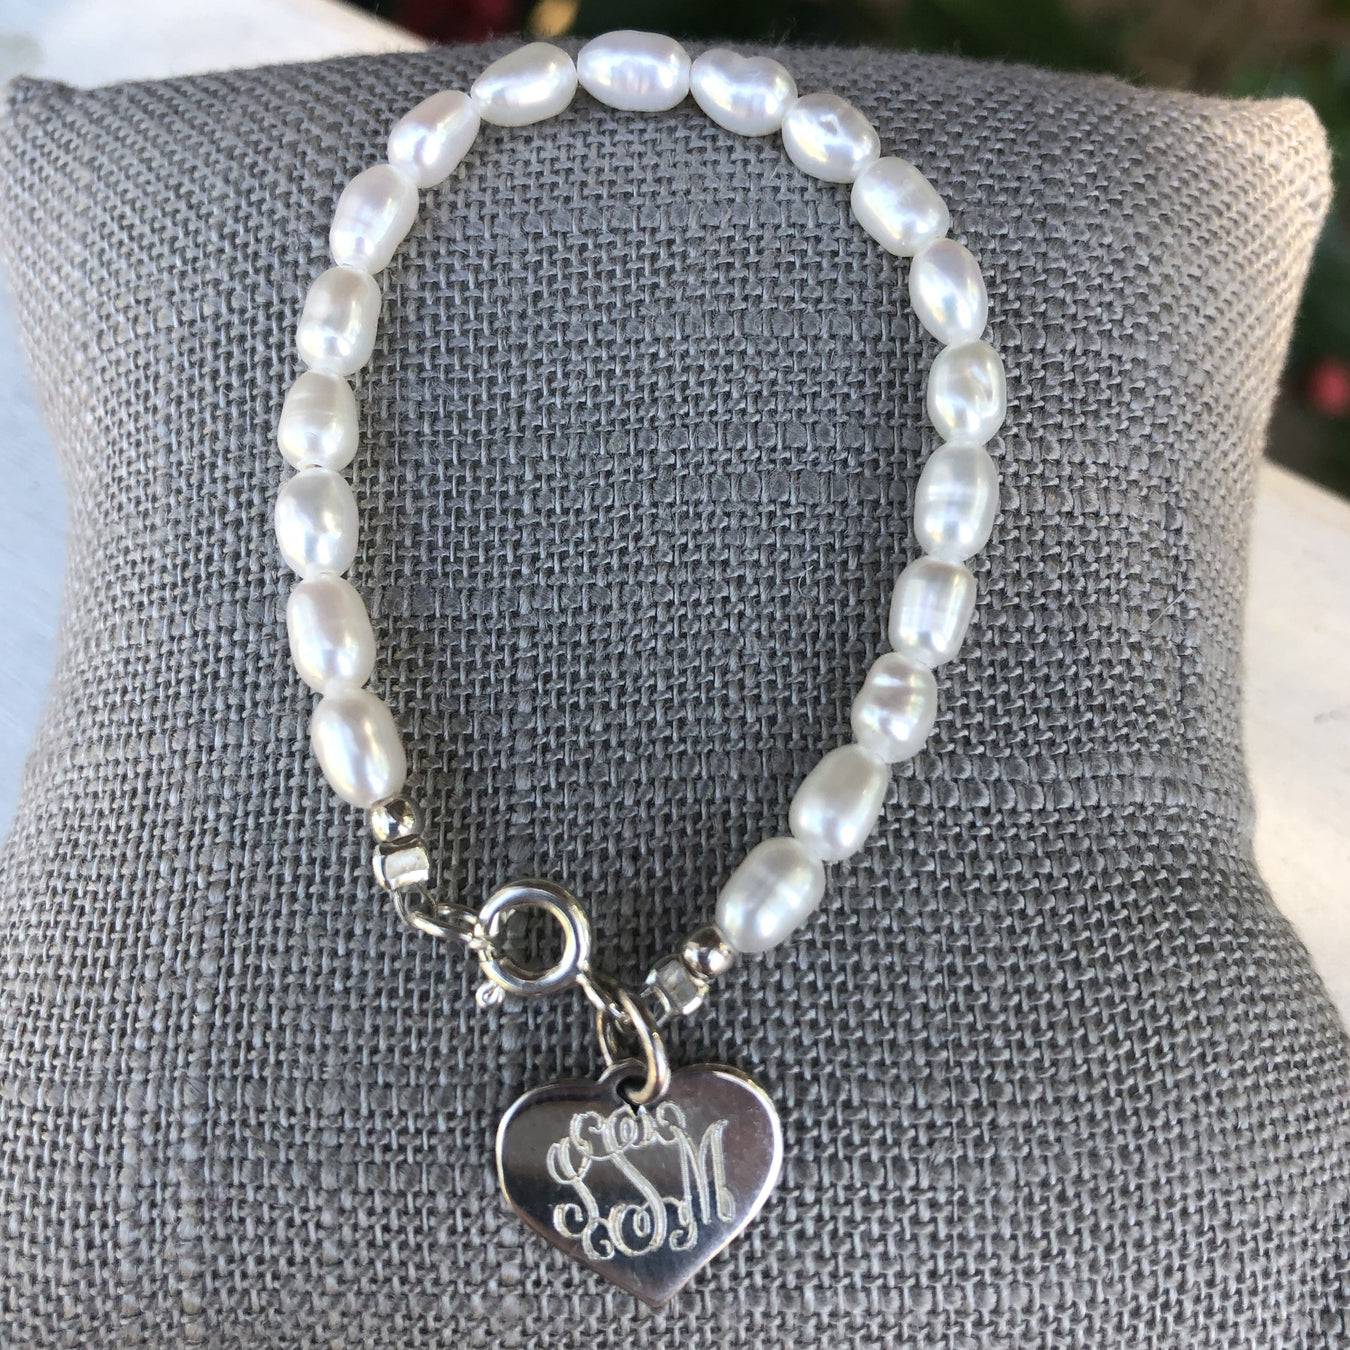 4.5” - (Newborn to 6 mos) White Beaded Pearl - without Charm